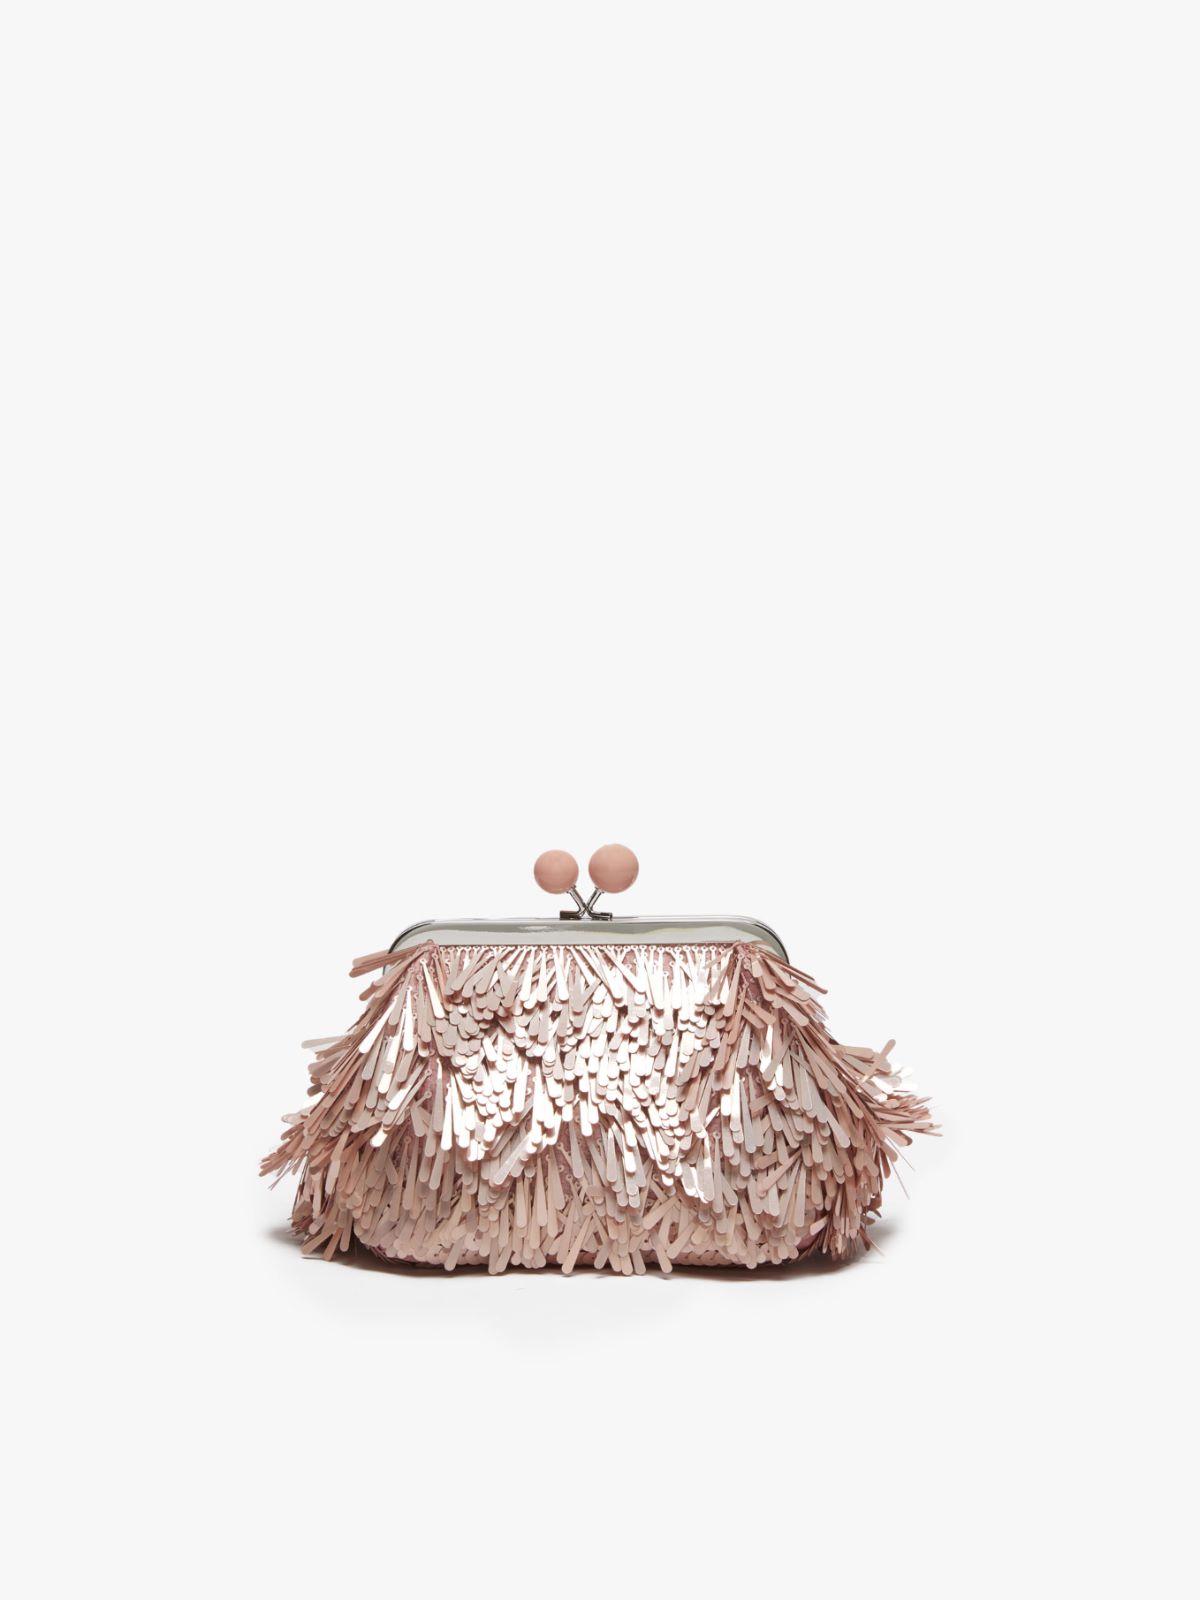 Small Pasticcino Bag with sequins - PINK - Weekend Max Mara - 3